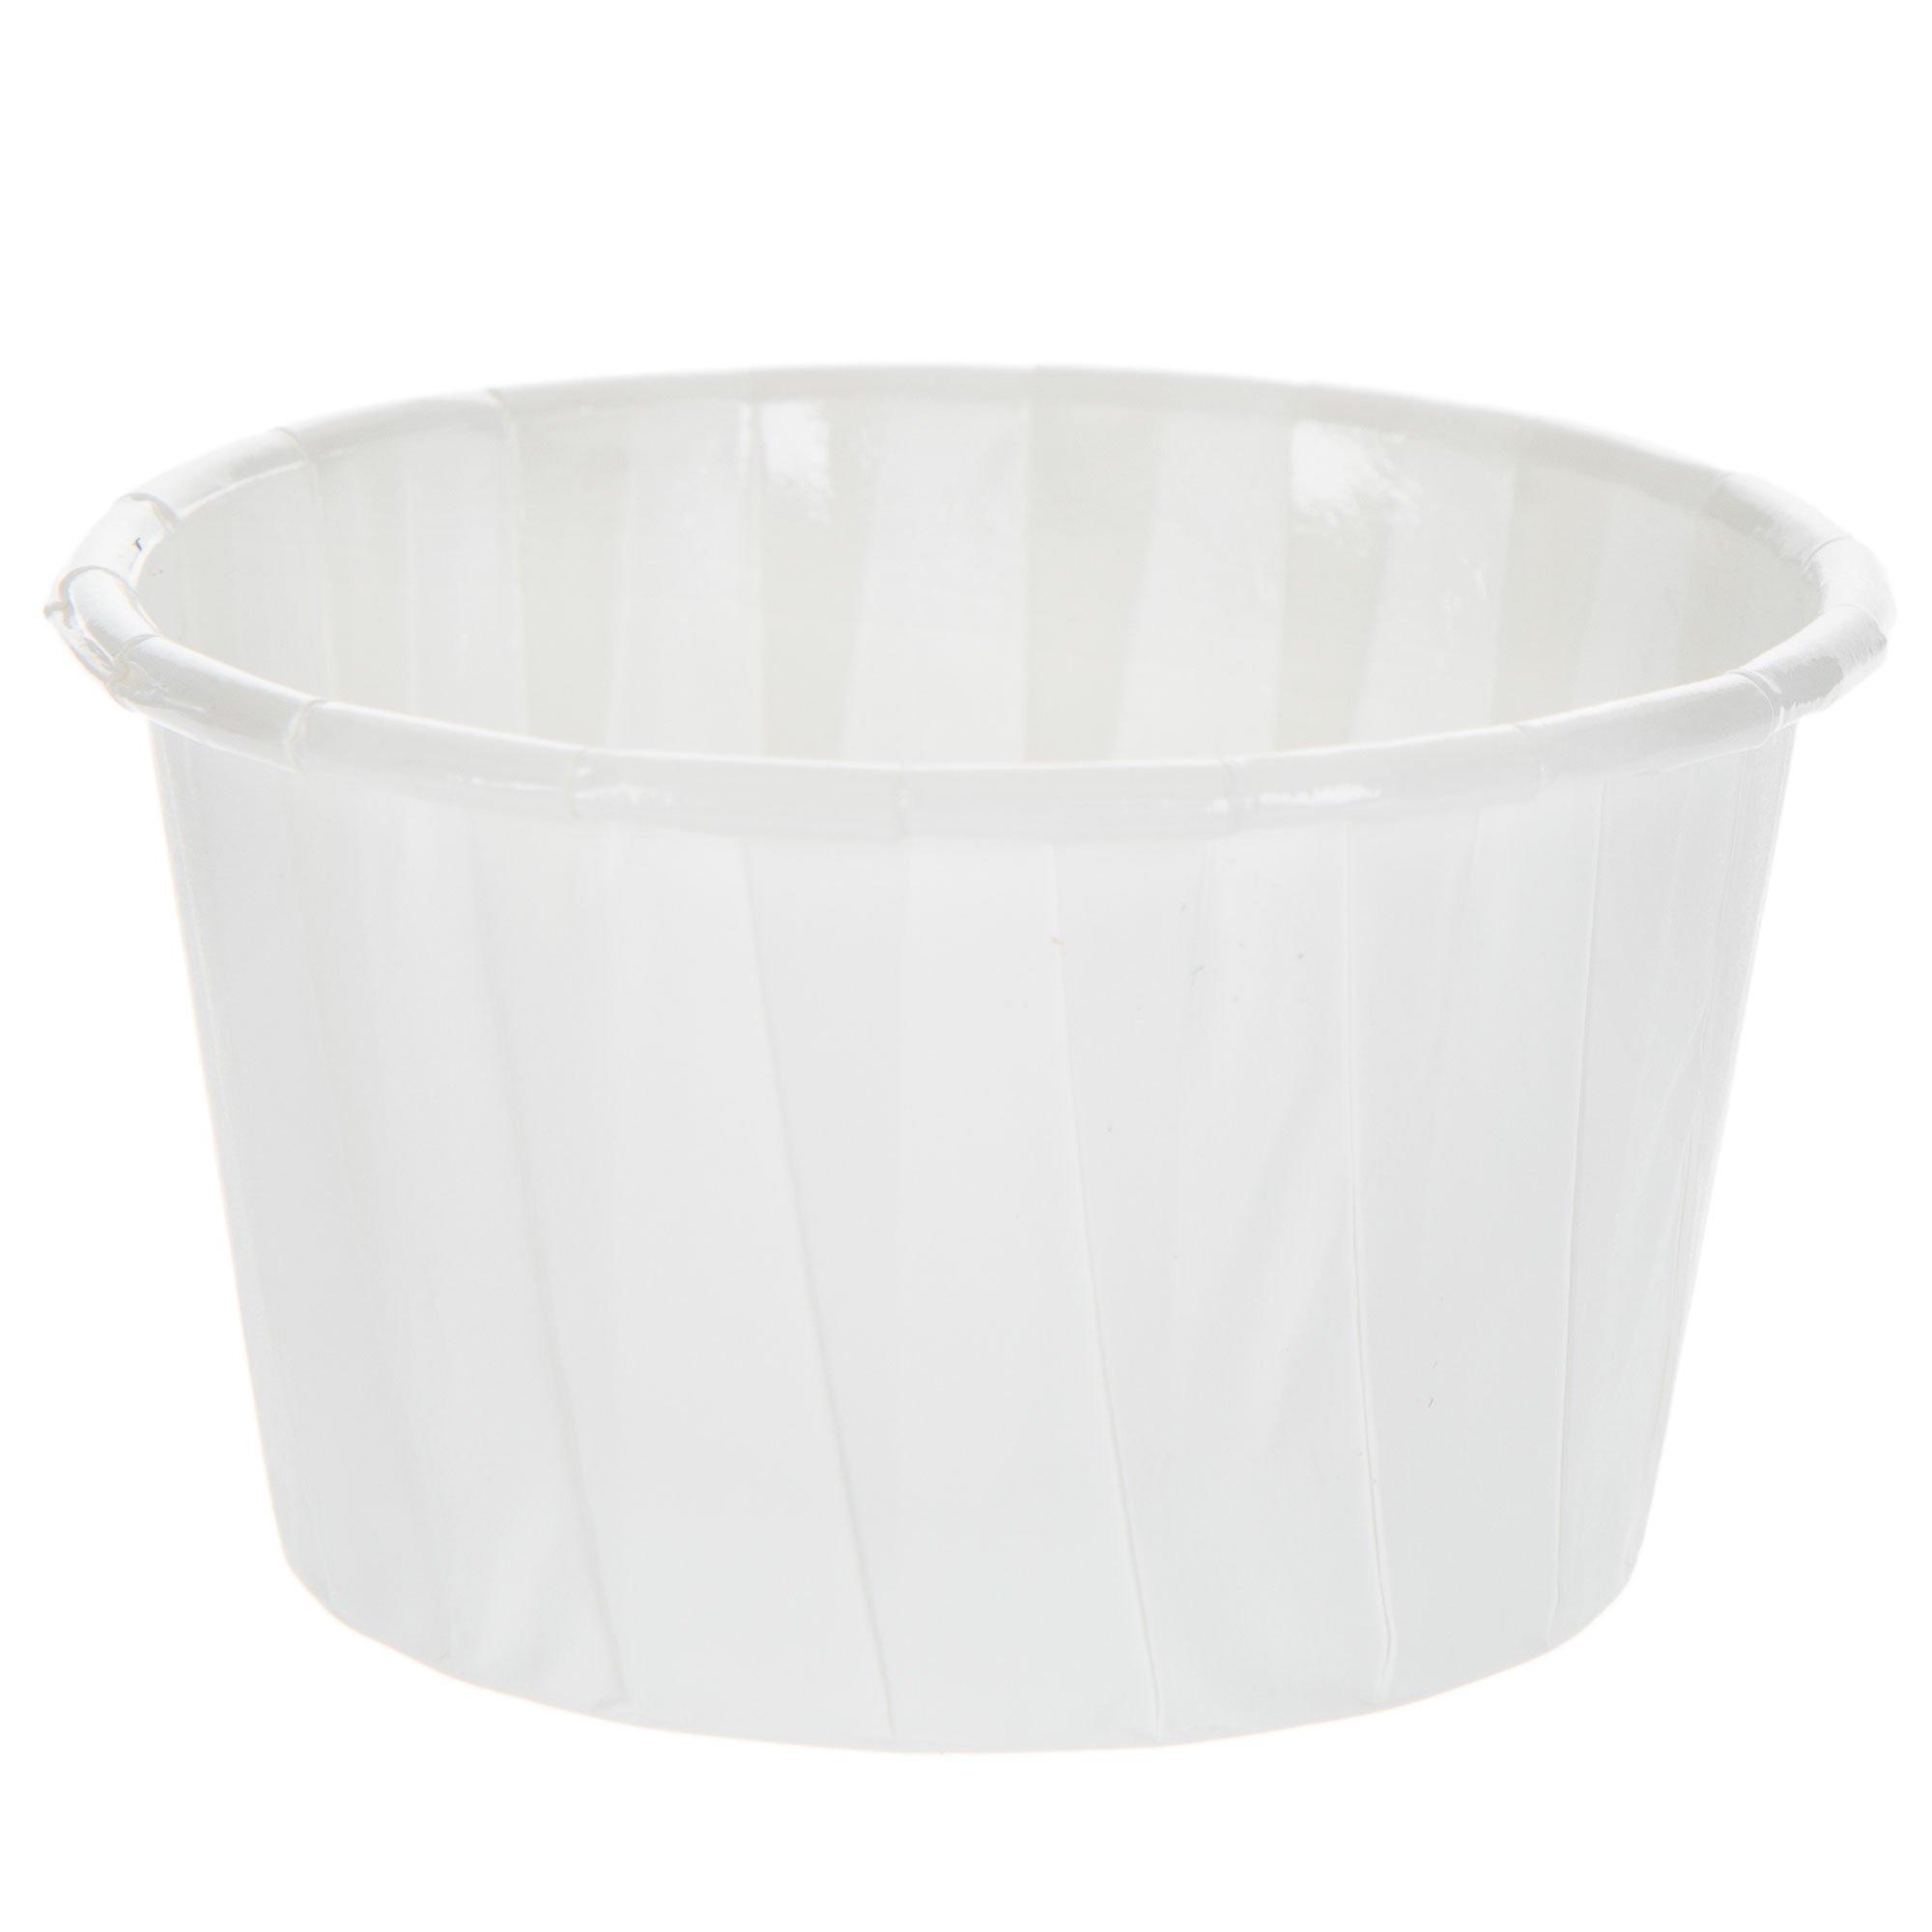 Portion Cups With Lids, Hobby Lobby